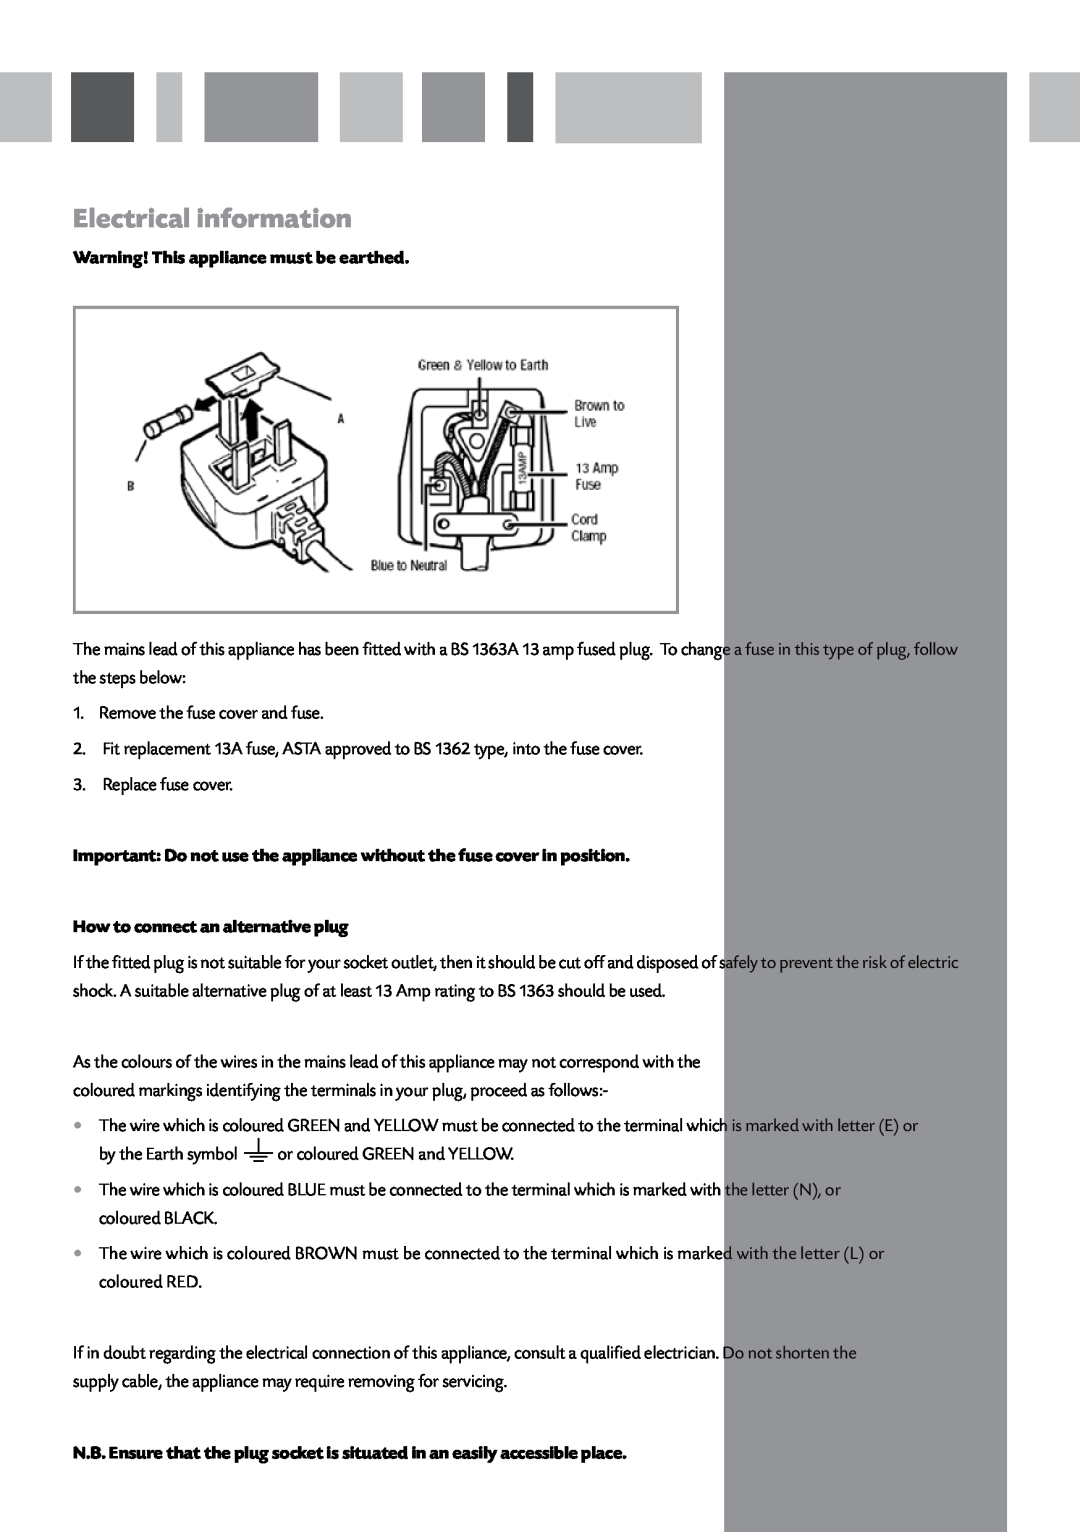 CDA FW282 manual Electrical information, Warning! This appliance must be earthed, How to connect an alternative plug 